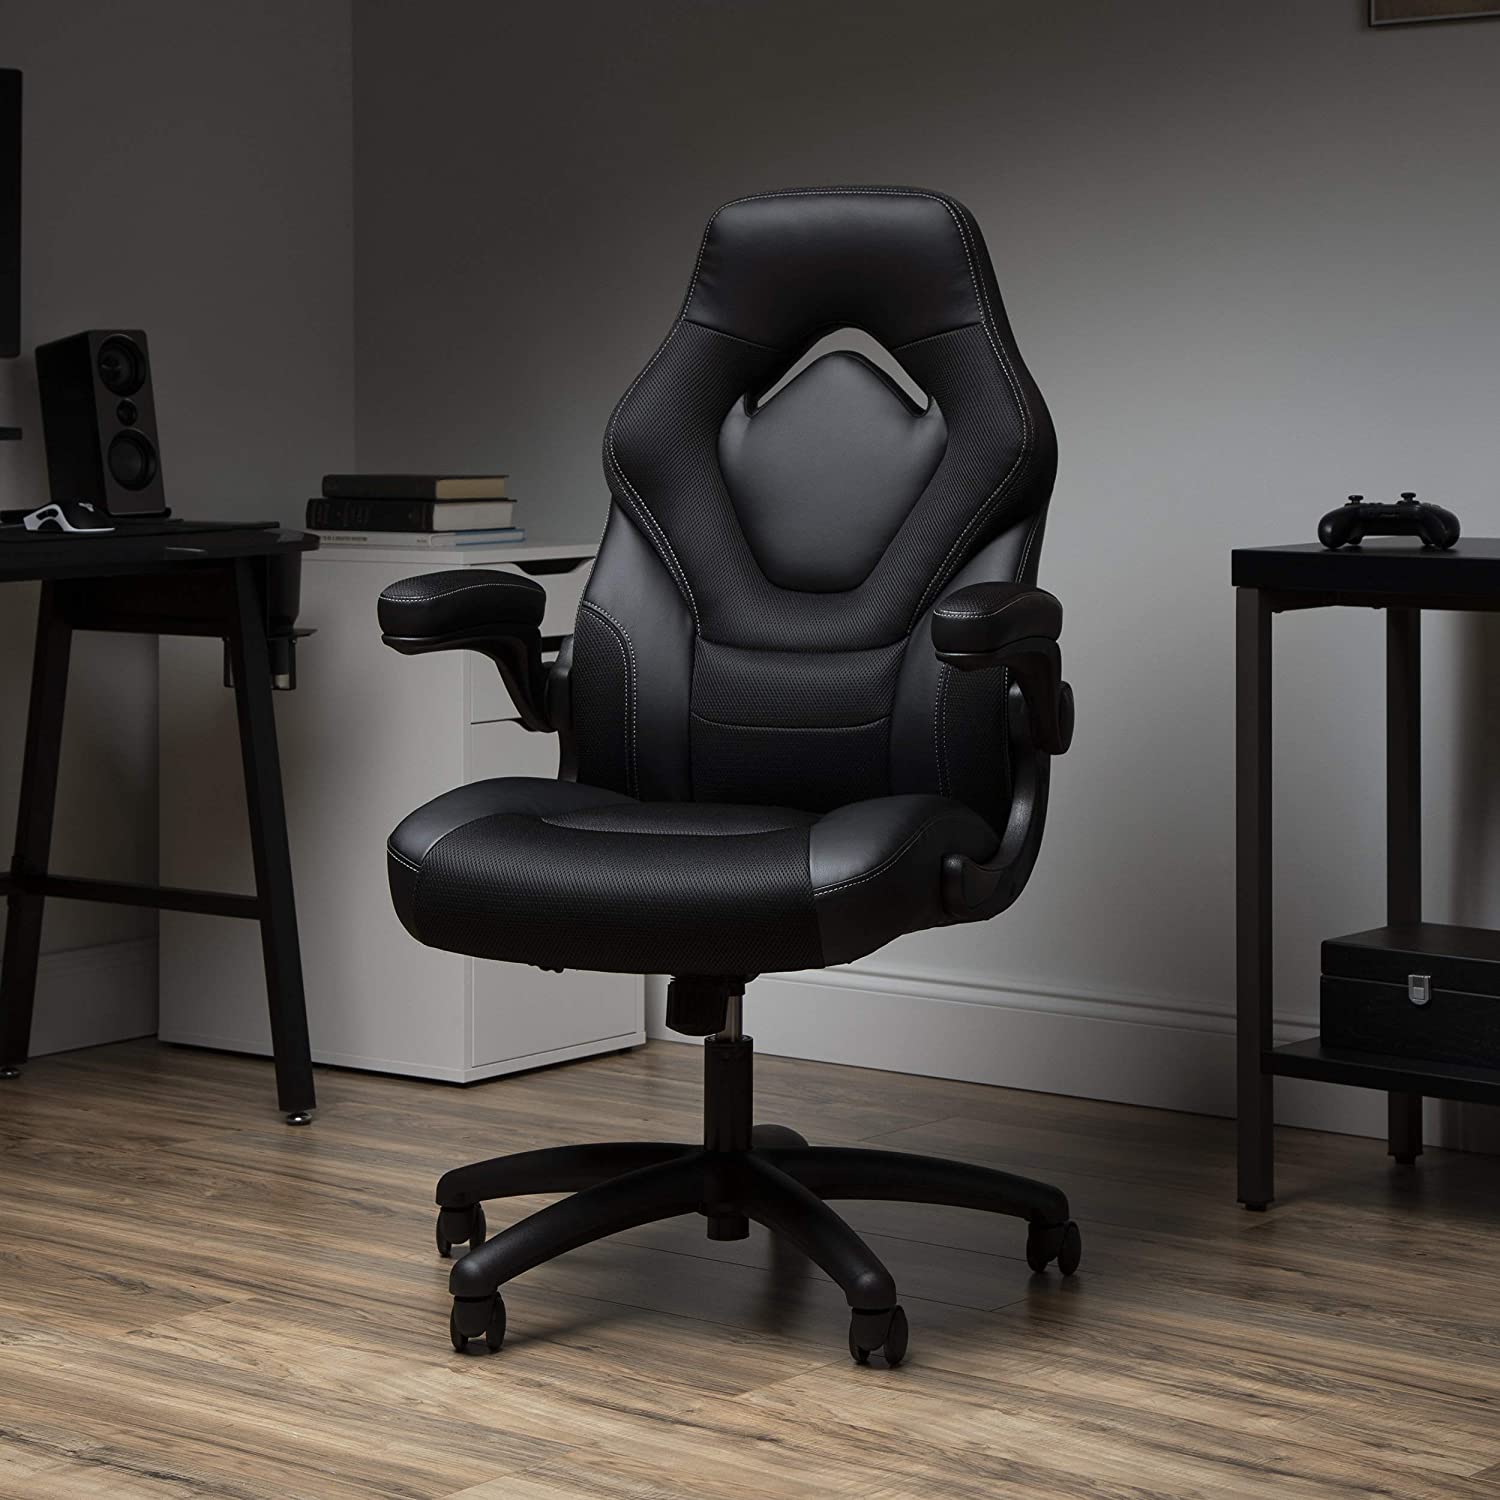 OFM ESS Gaming Chair